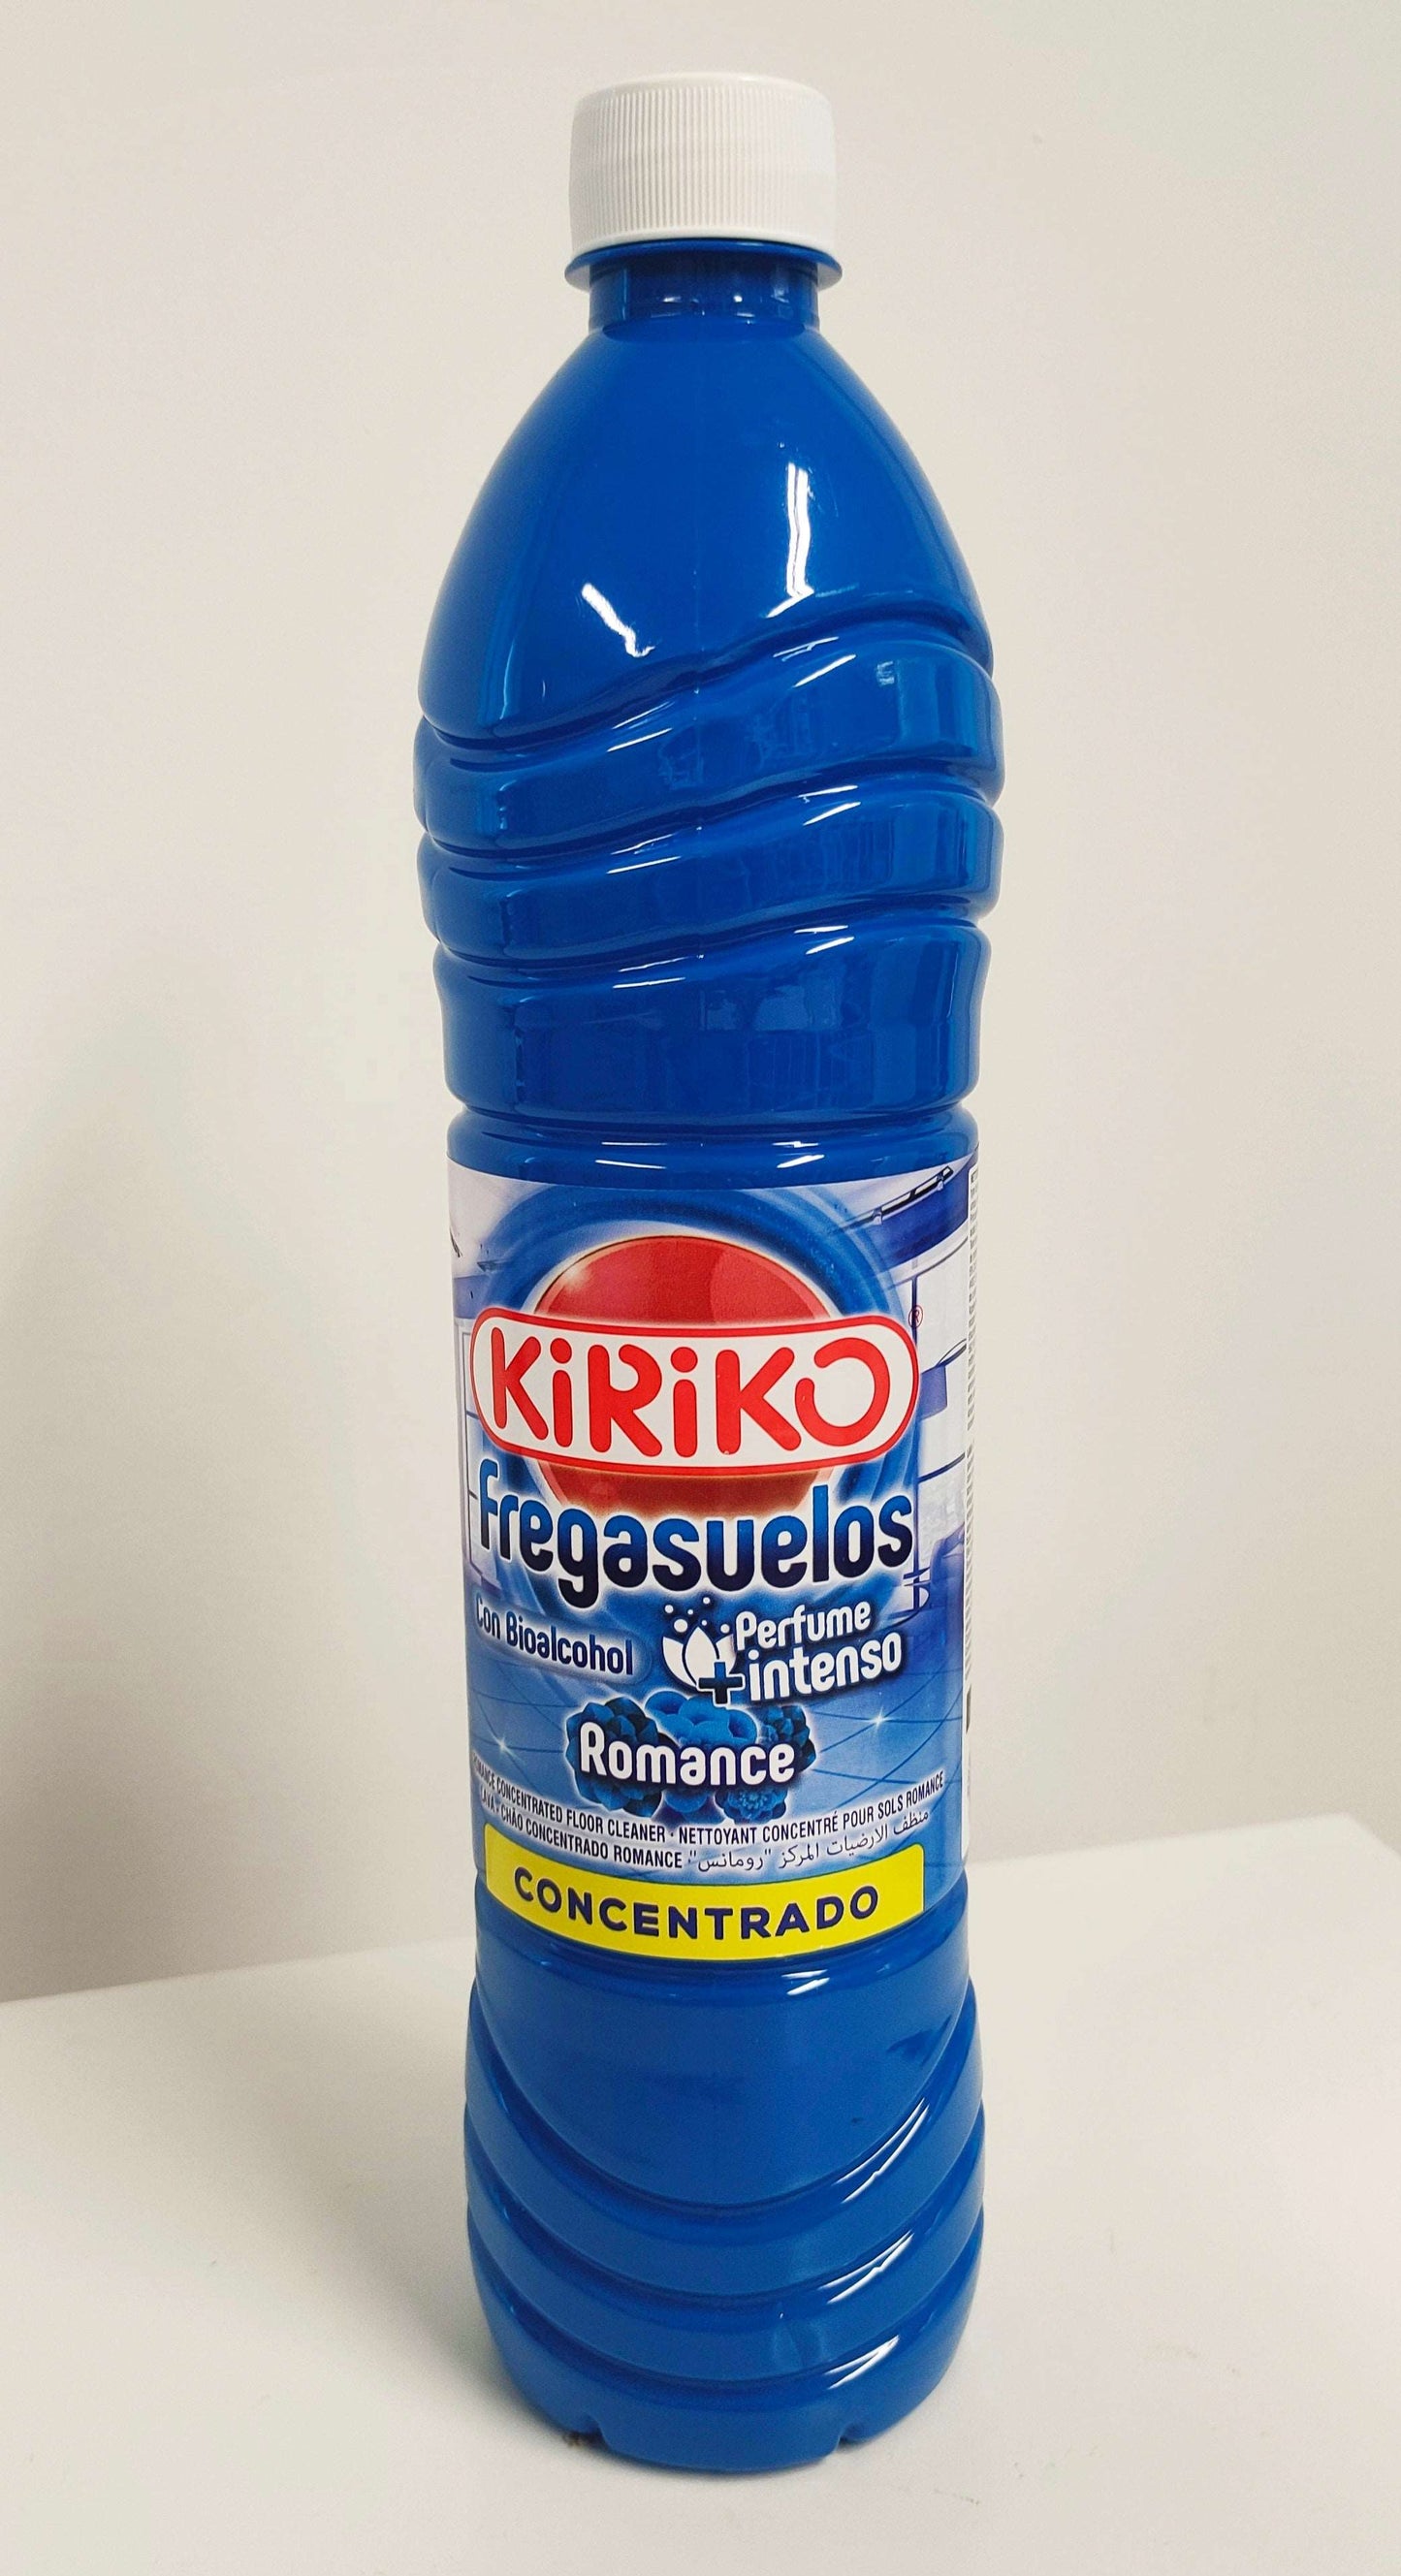 Kiriko Romance Concentrated Multi-surface and floor cleaner 1l